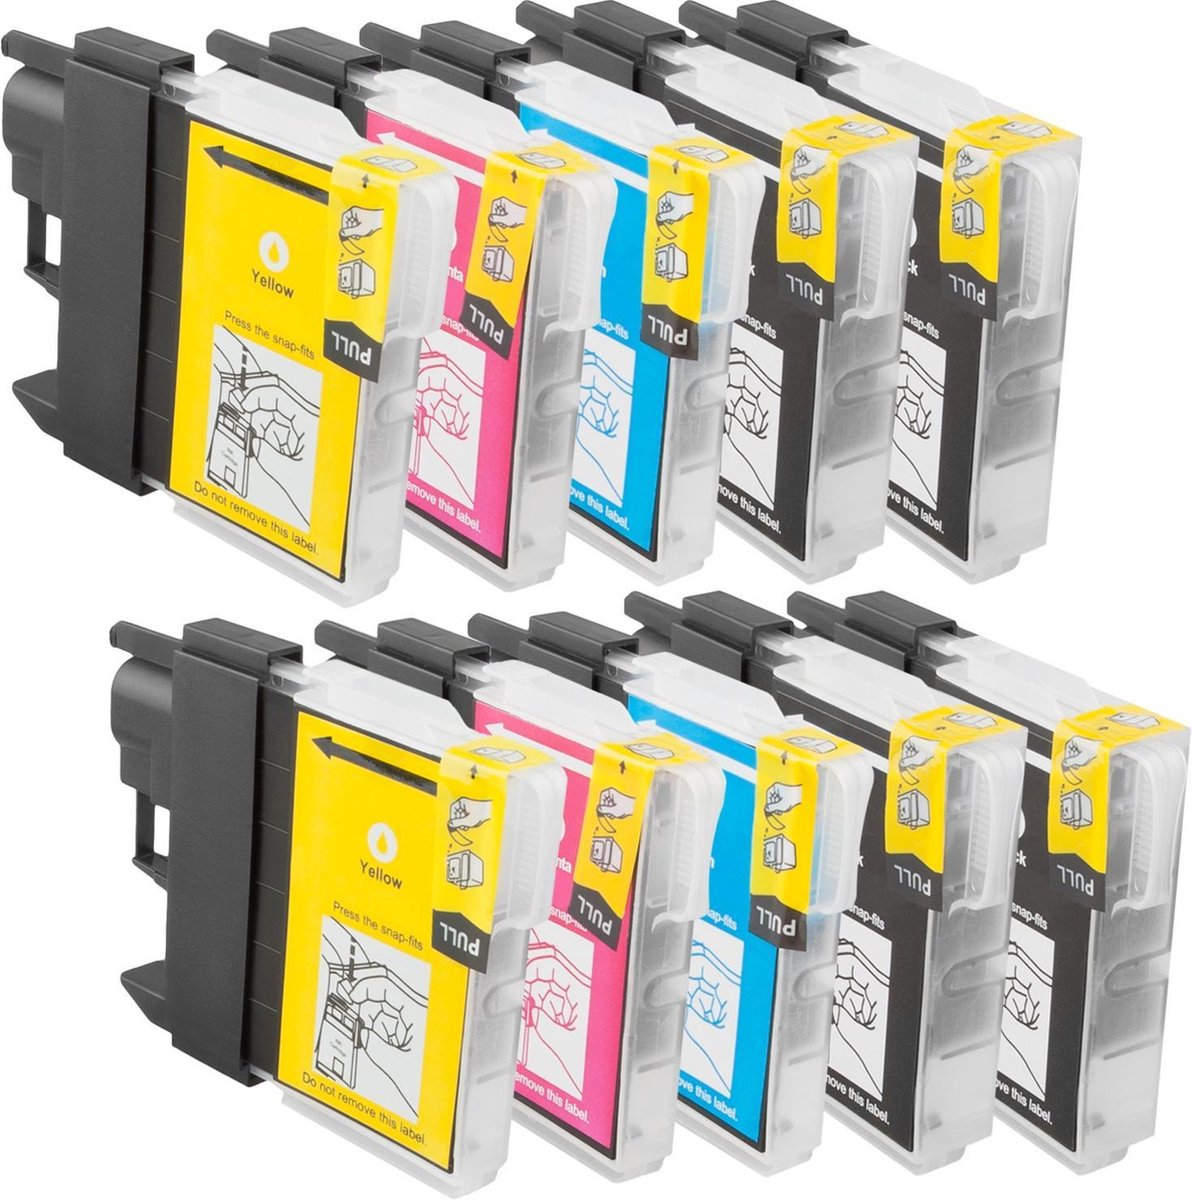 Compatible Brother LC-1100/LC-980 inktcartridges